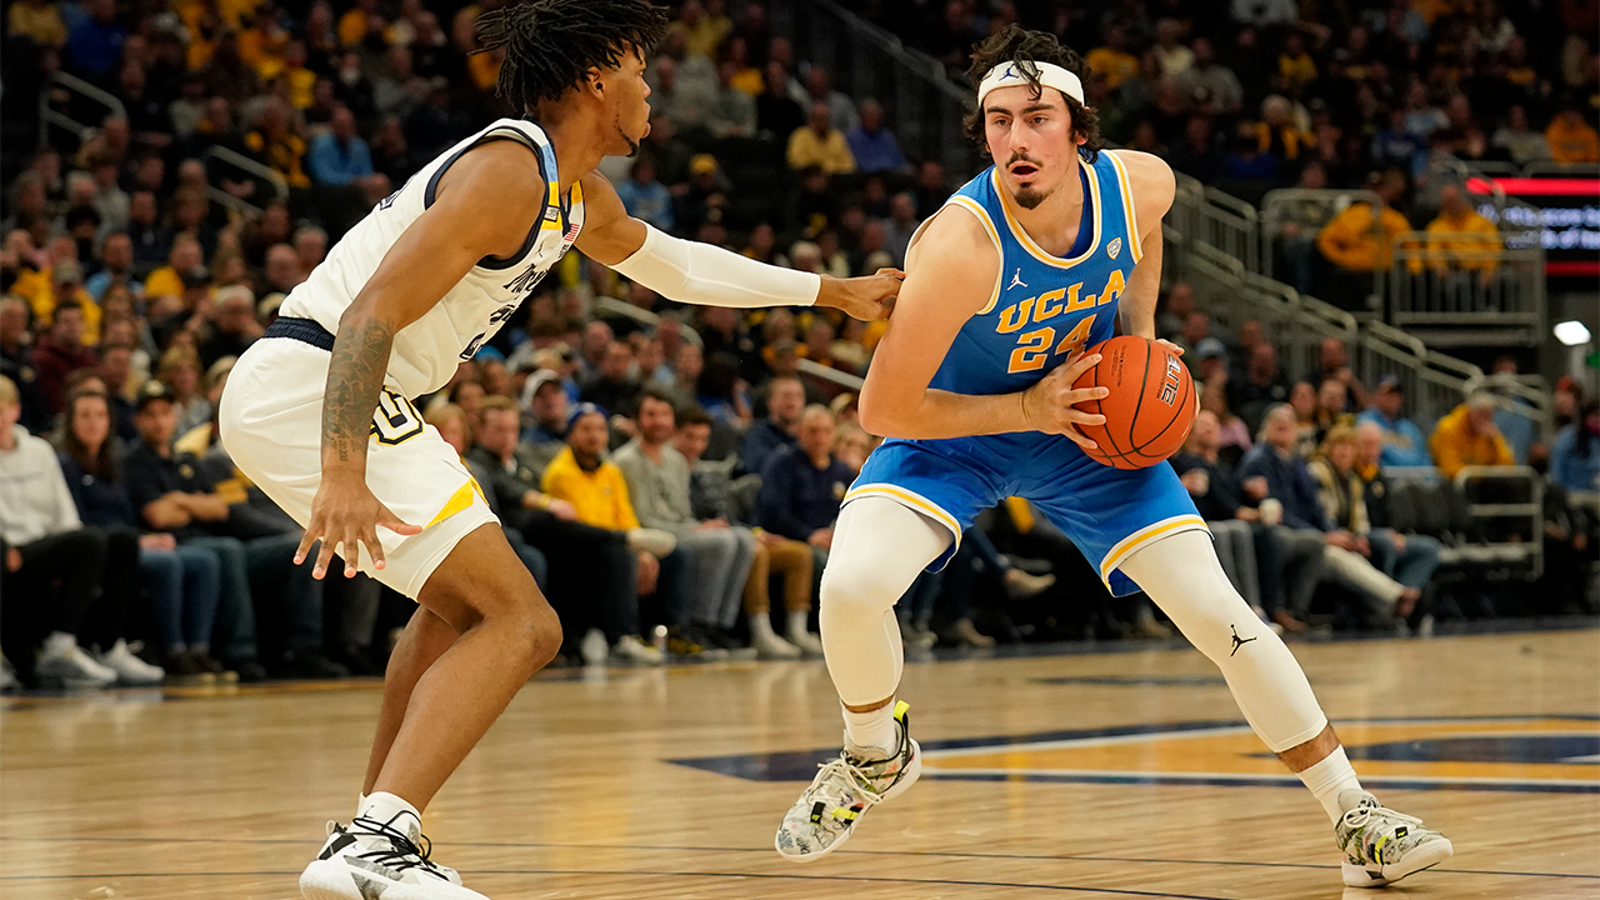 UCLA dominates from start to finish and beats Marquette 67-56 behind Jaime Jaquez Jr.'s 24 points